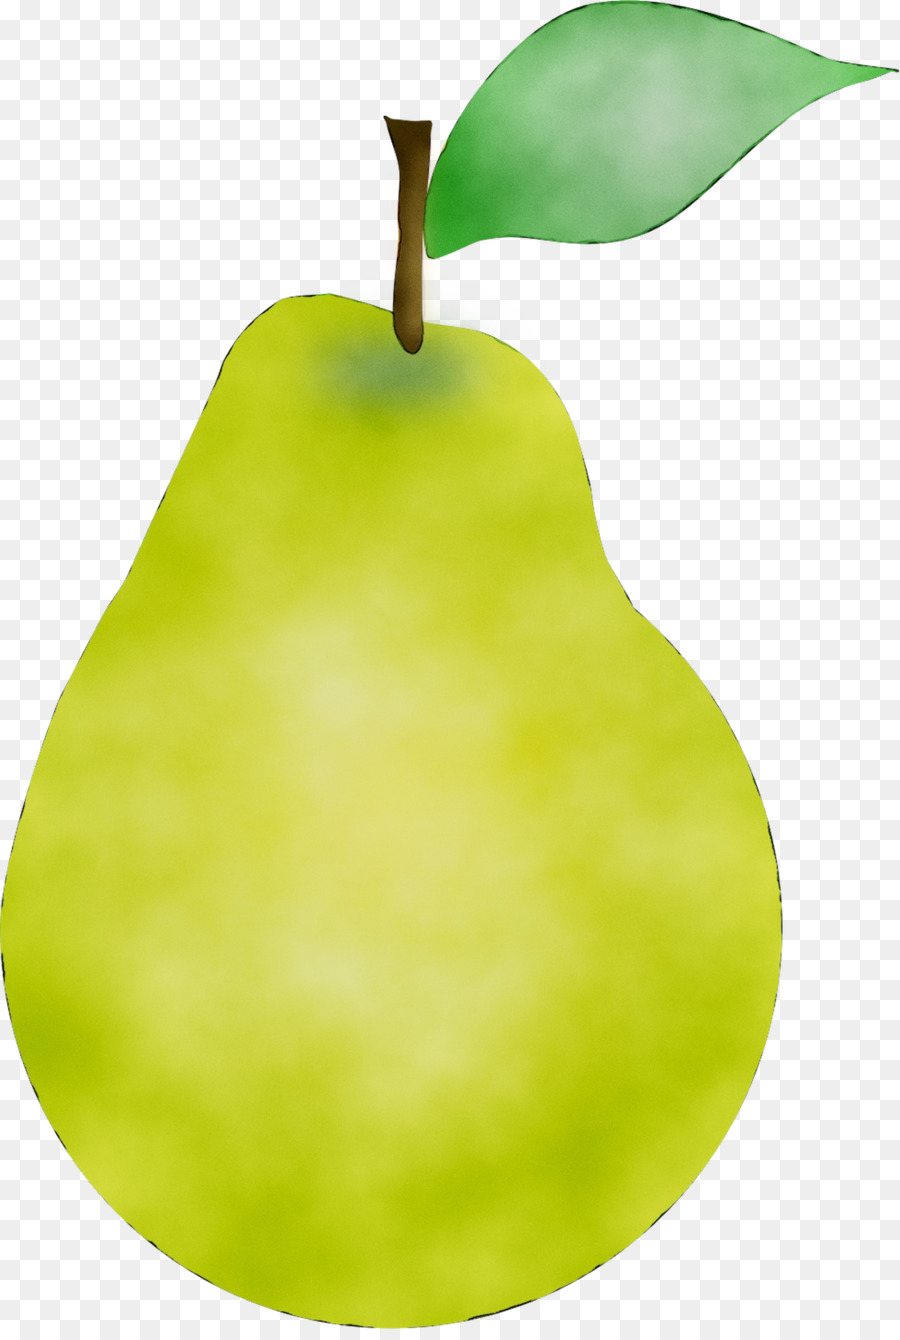 Pear Product design Apple -  png download - 1127*1664 - Free Transparent Pear png Download.